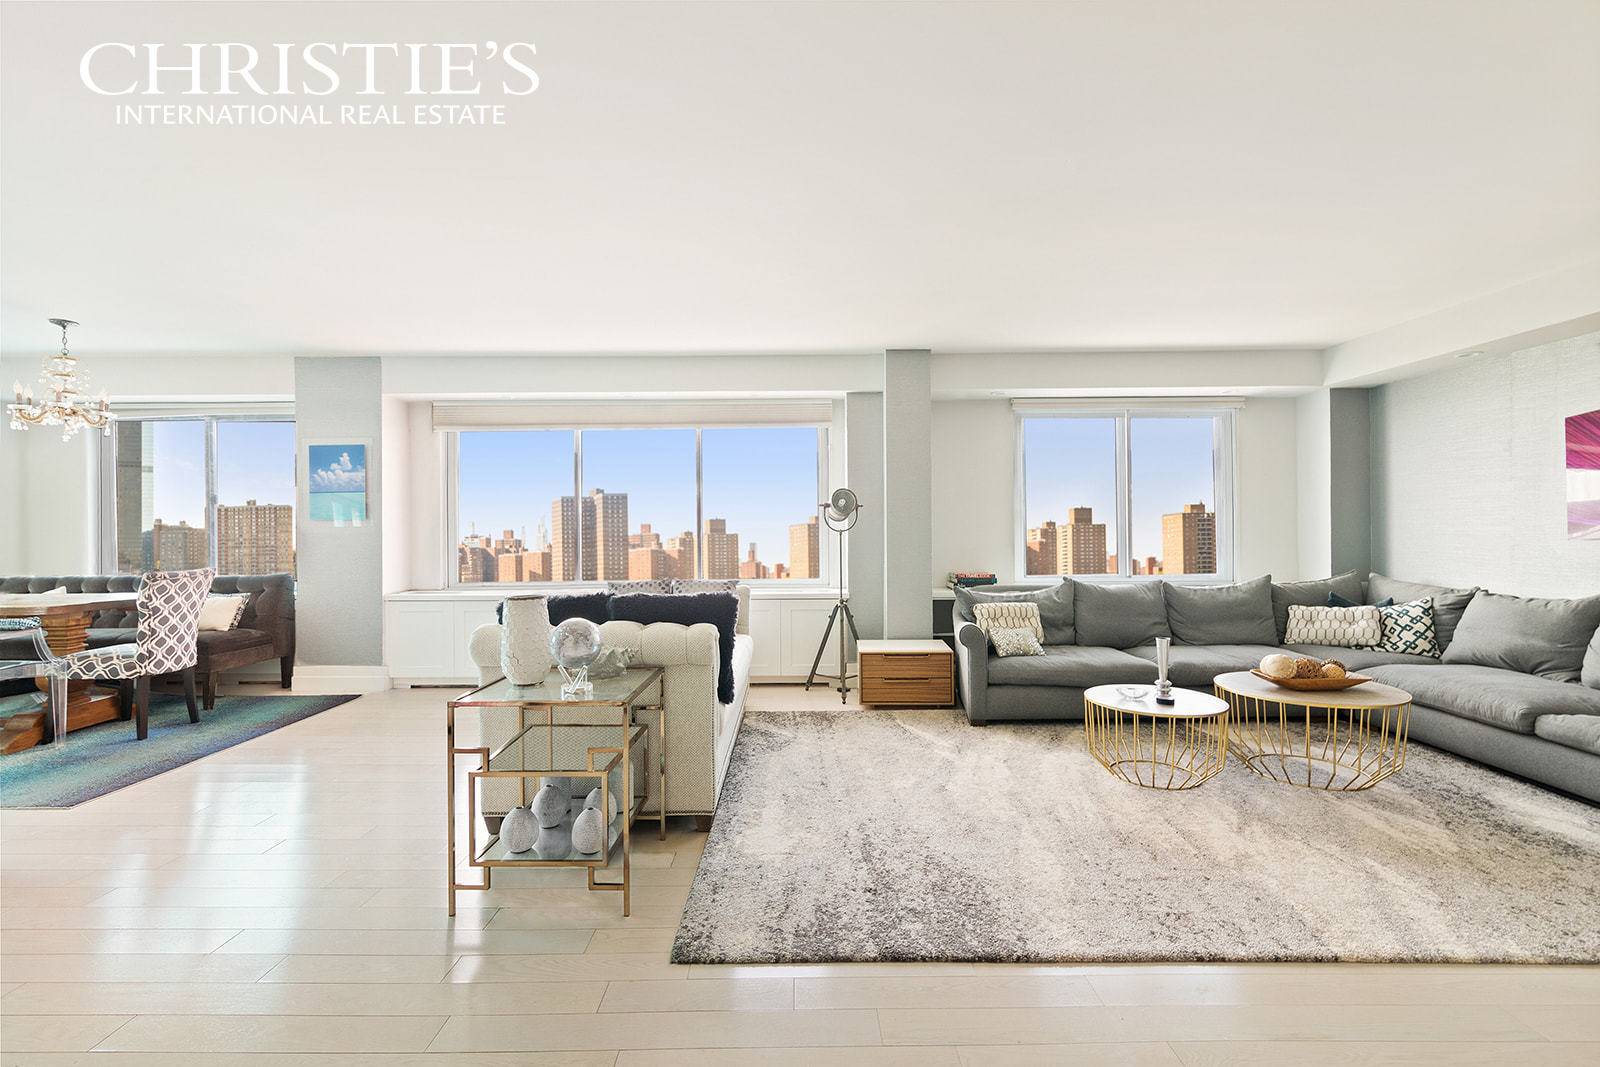 Residence 12CD at 175 West 12th Street is a three bedroom, three bathroom gorgeously renovated condominium.